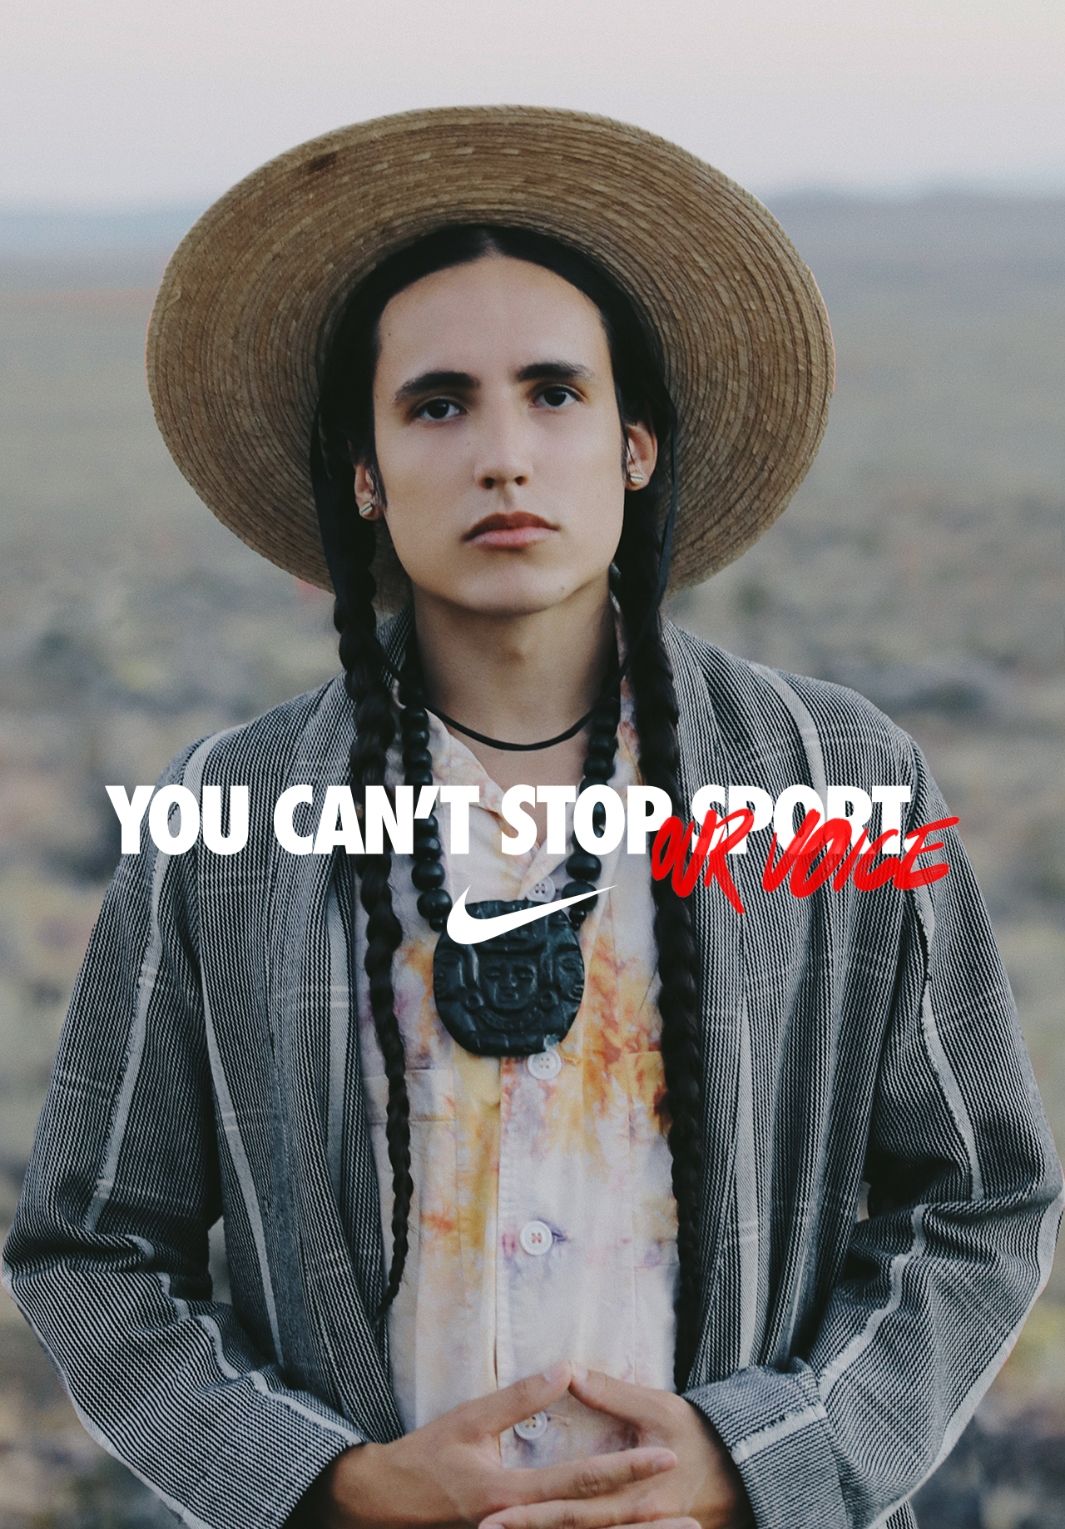 Xiuhtezcatl-Martinez in desert close up. You can't stop our sport / our voice. nike swoosh